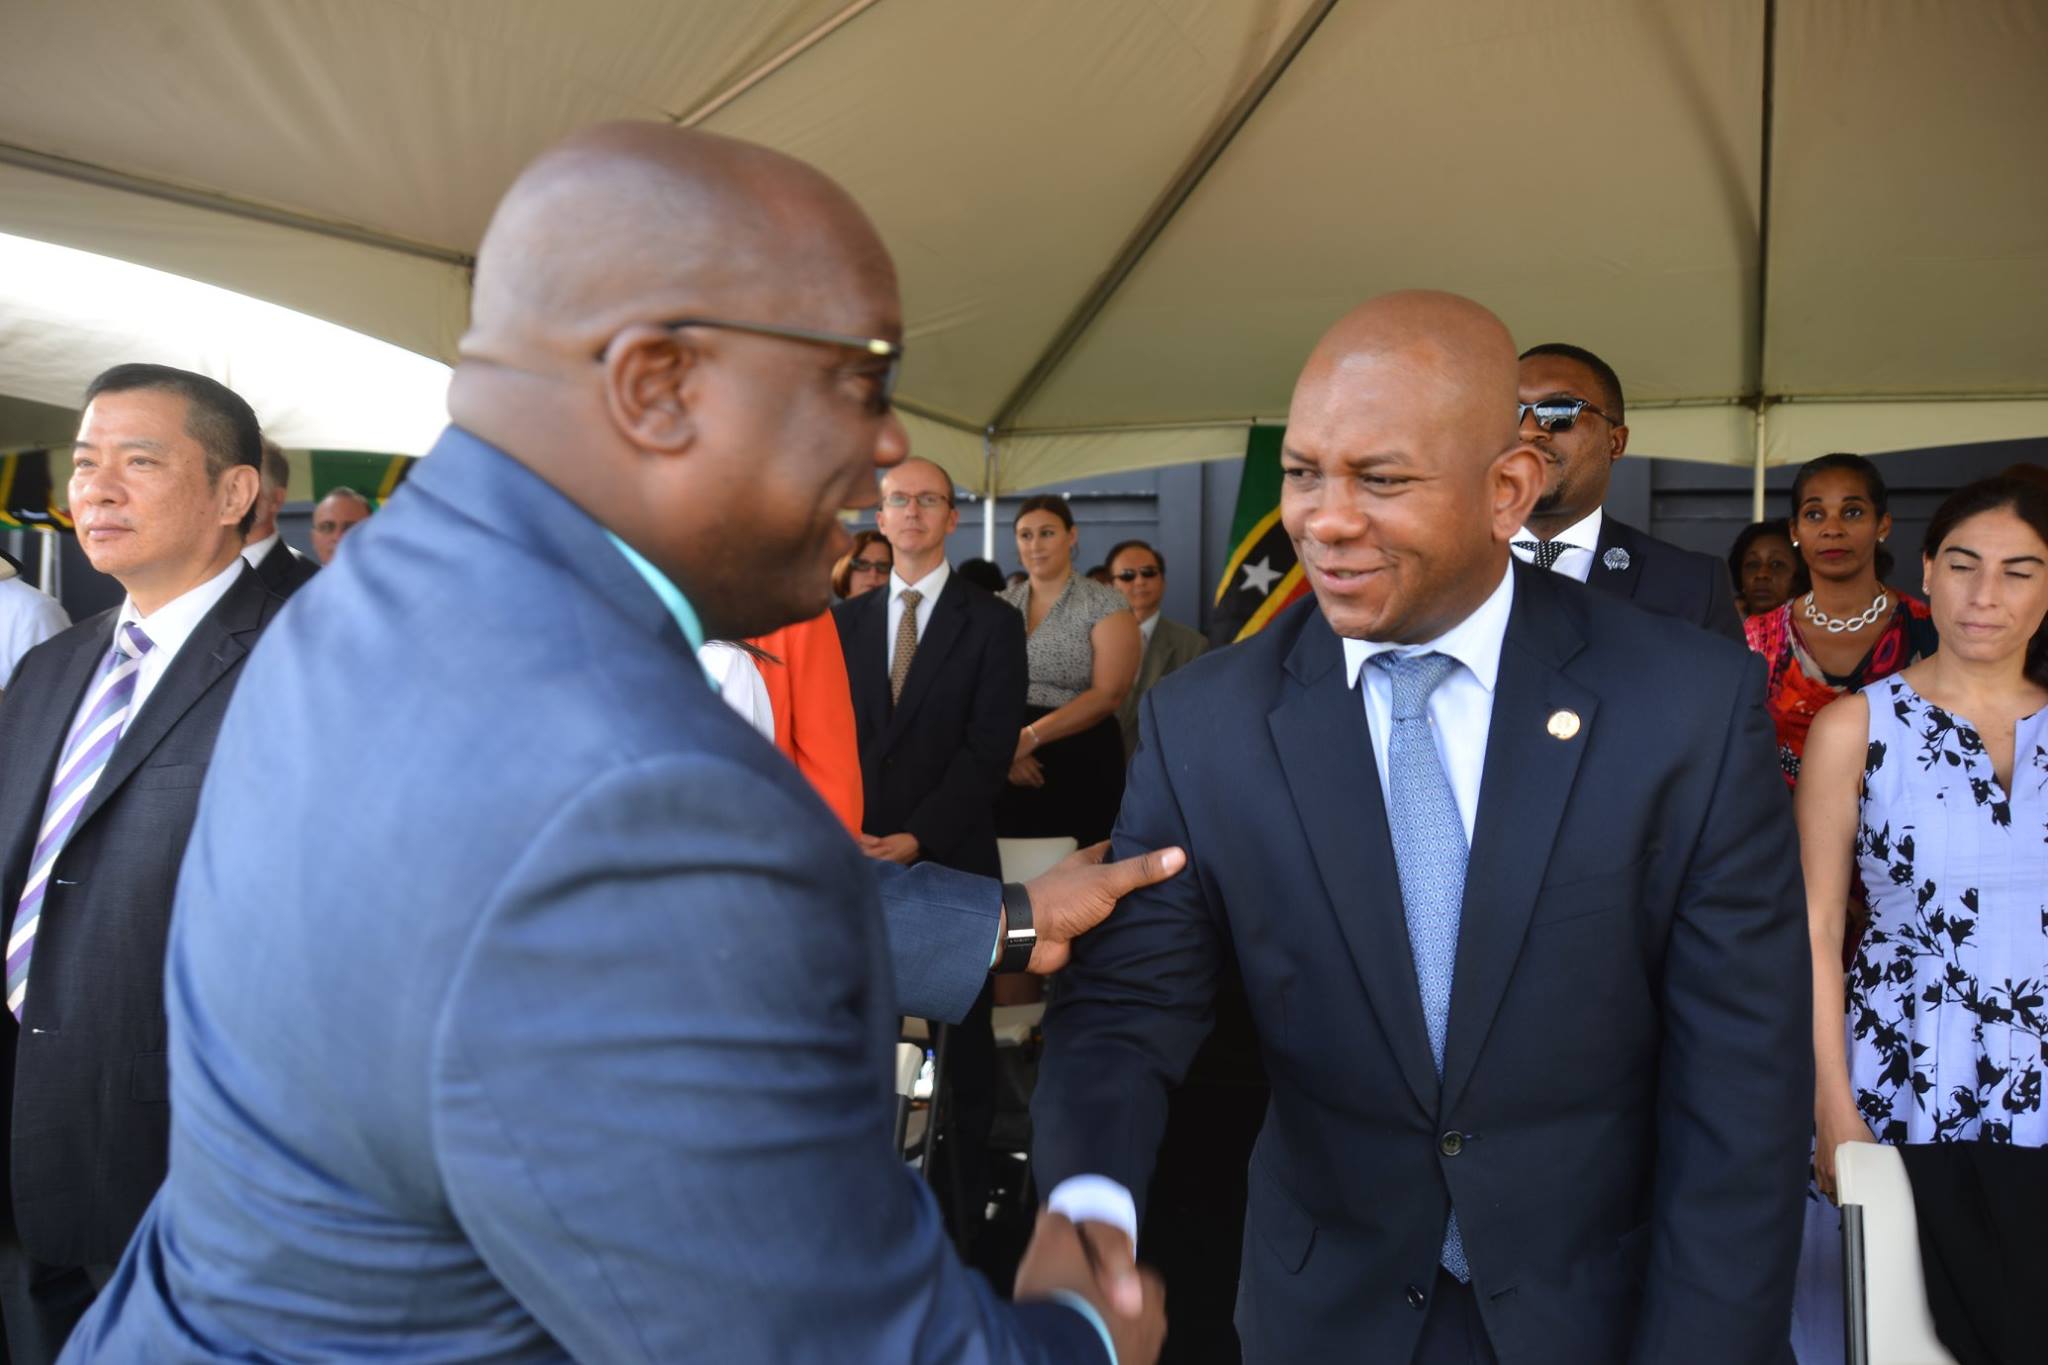 THE FEDERATION OF ST KITTS AND NEVIS 33RD INDEPENDENCE DAY NATIONAL PARADE AT WARNER PARK - OAS Representative, Mr Terence Craig Greets the Prime Minister, The Honourable Dr Timothy Harris at the National Independence Day Parade(September 19, 2016)